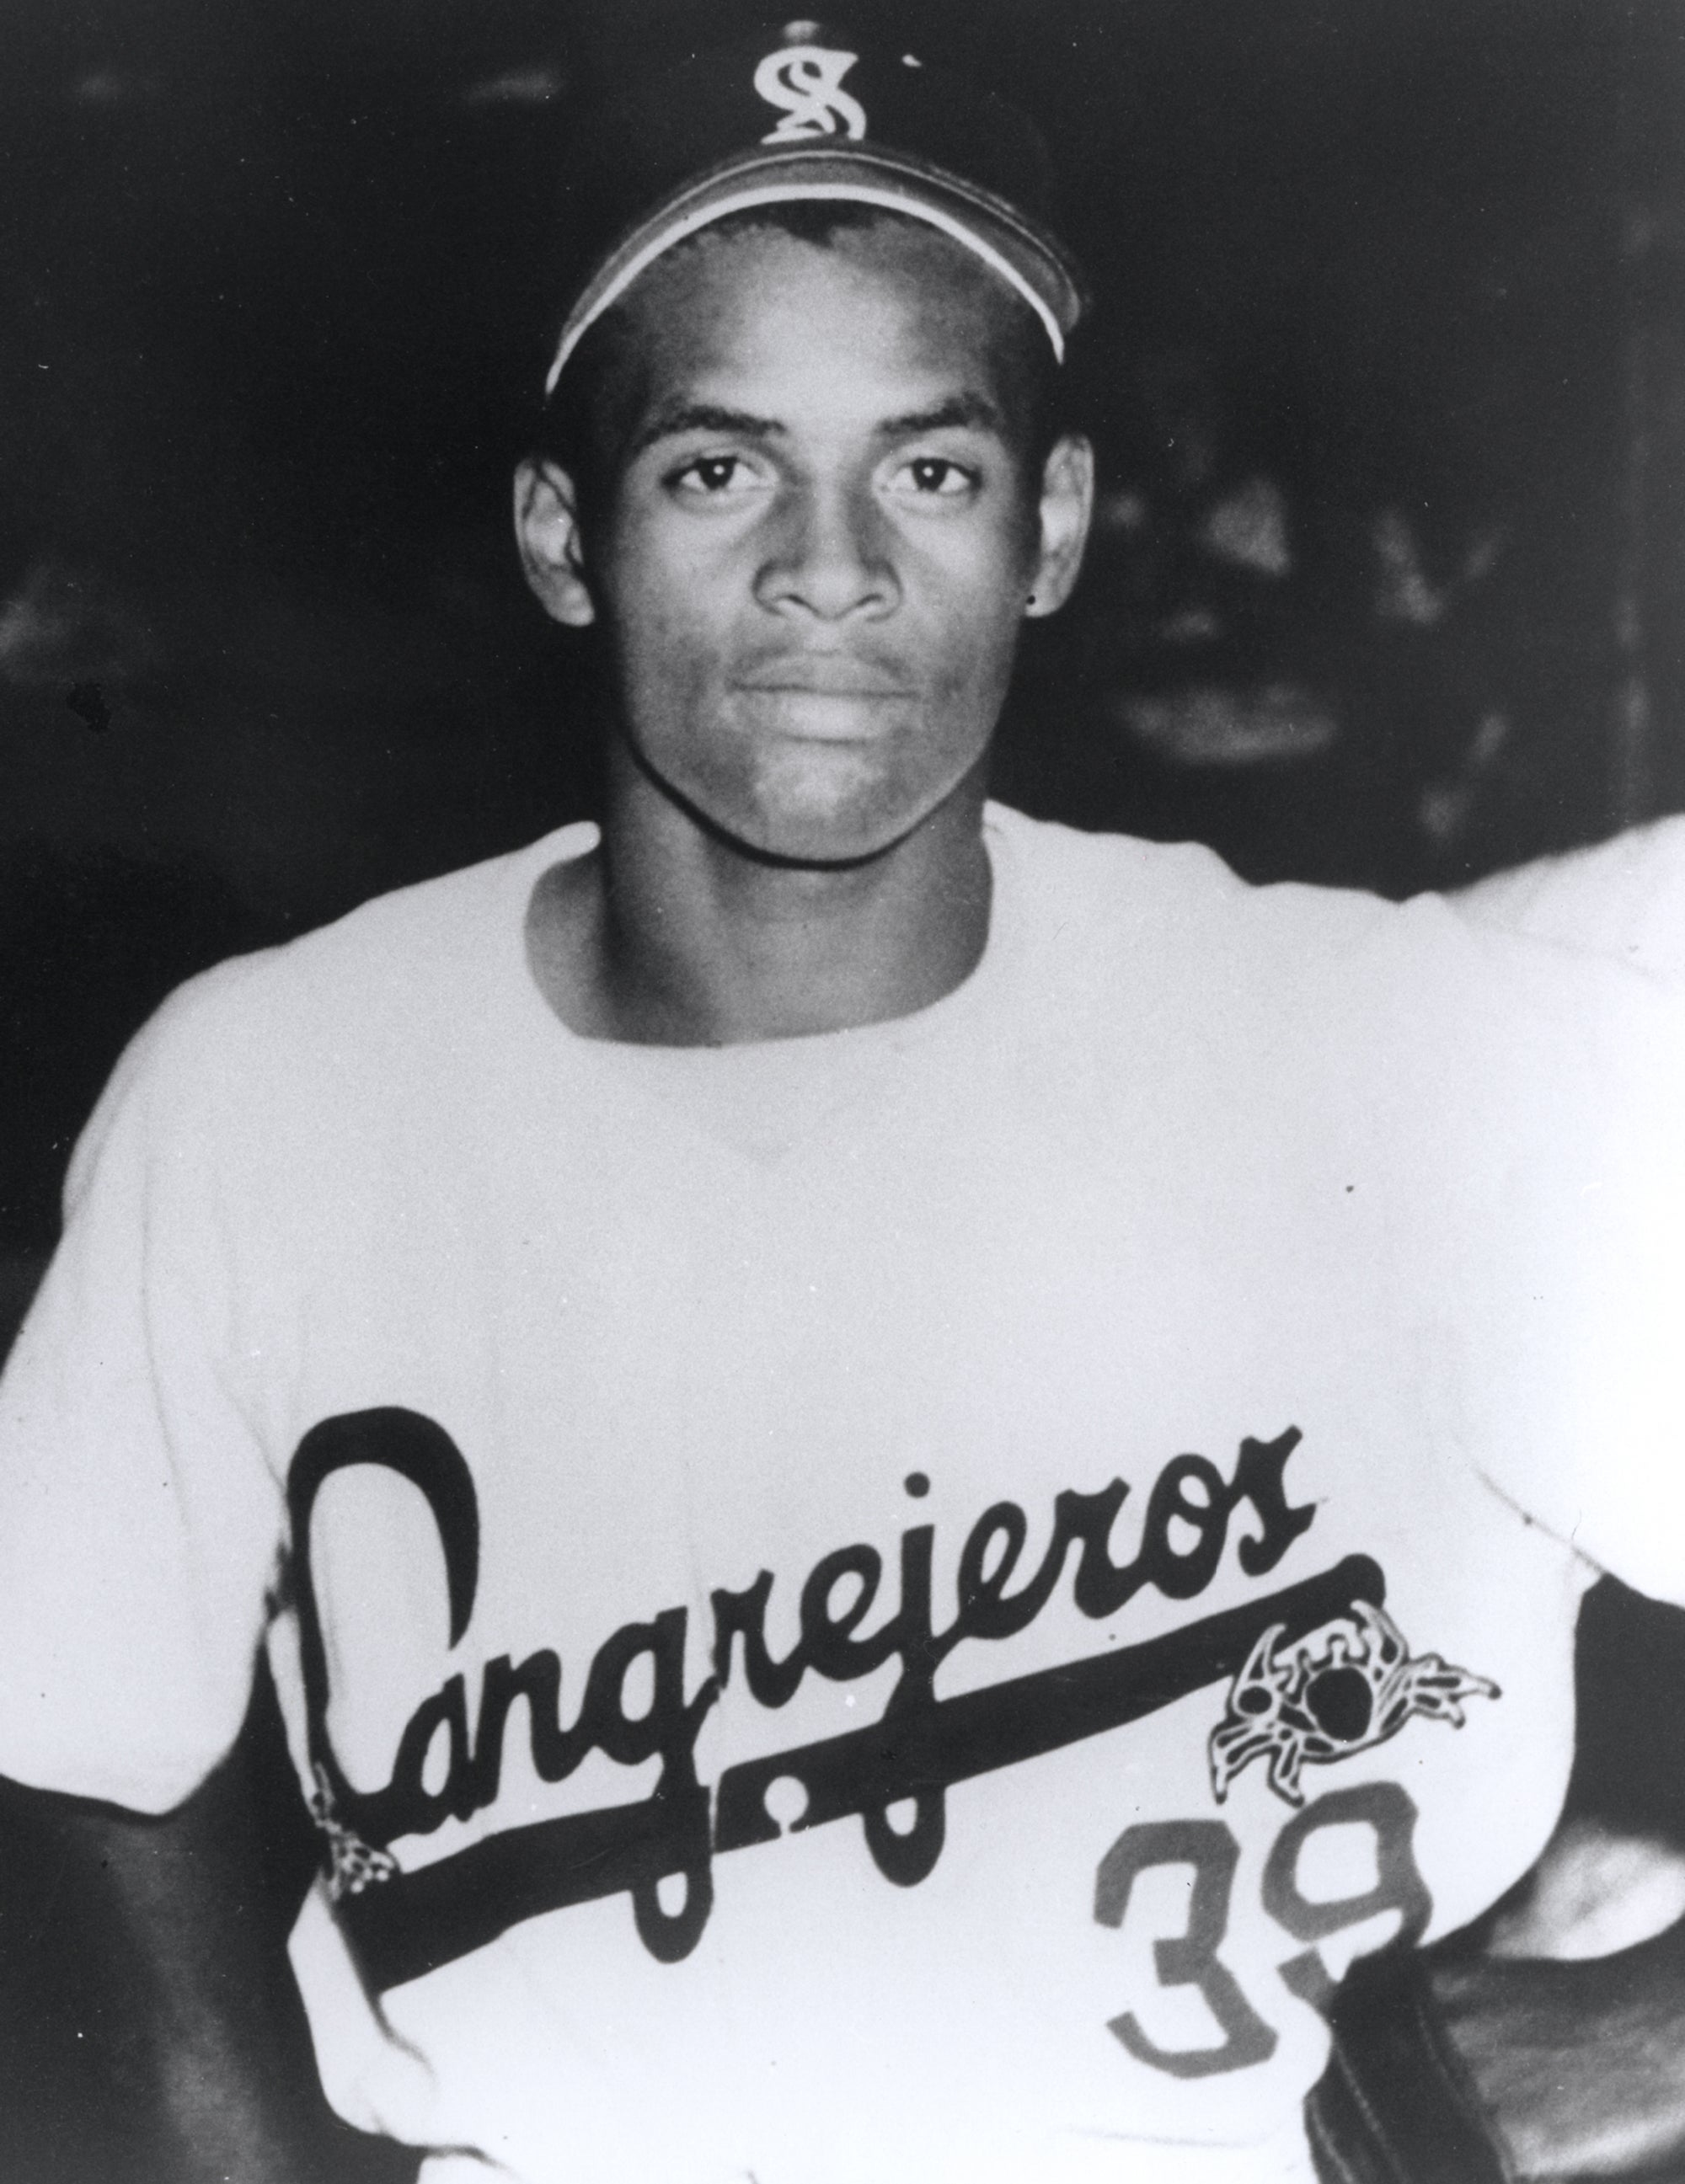 Roberto Clemente’s destiny was shaped as a youngster in Puerto Rico